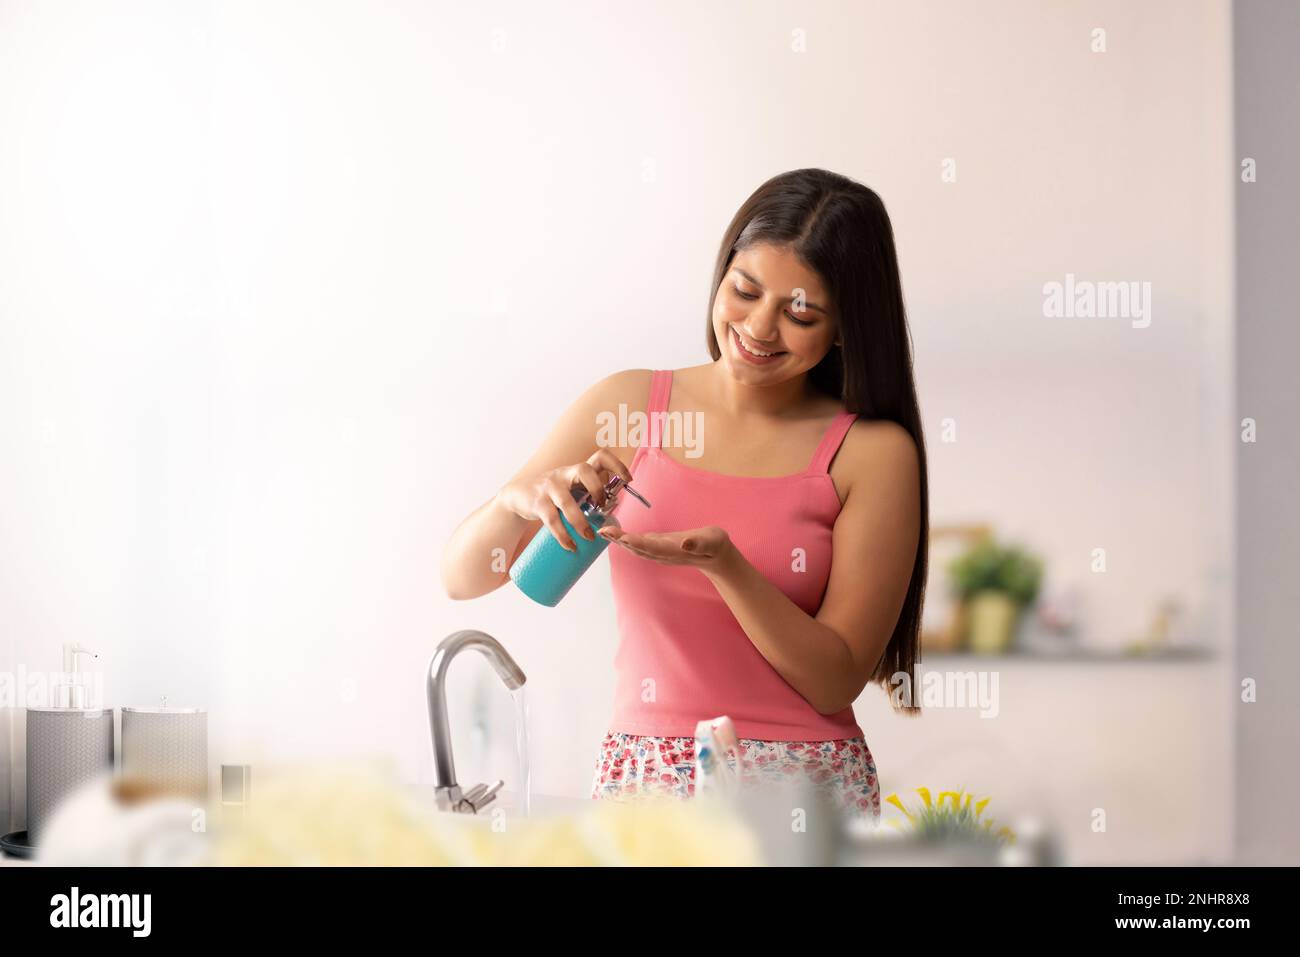 Woman cleaning her hands with liquid hand wash in bathroom Stock Photo